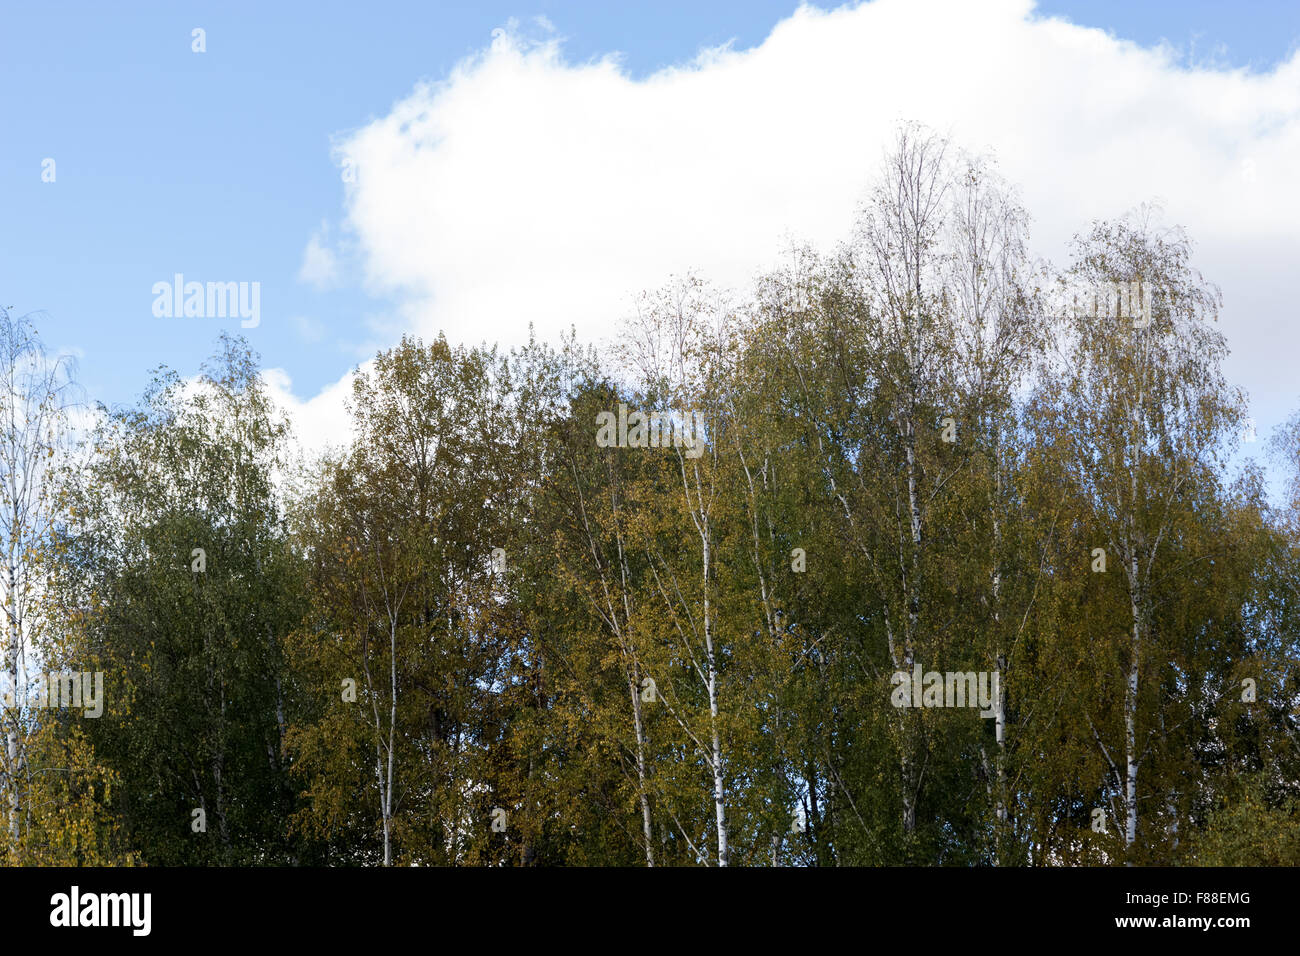 tops of trees against the blue cloudy sky in early autumn Stock Photo